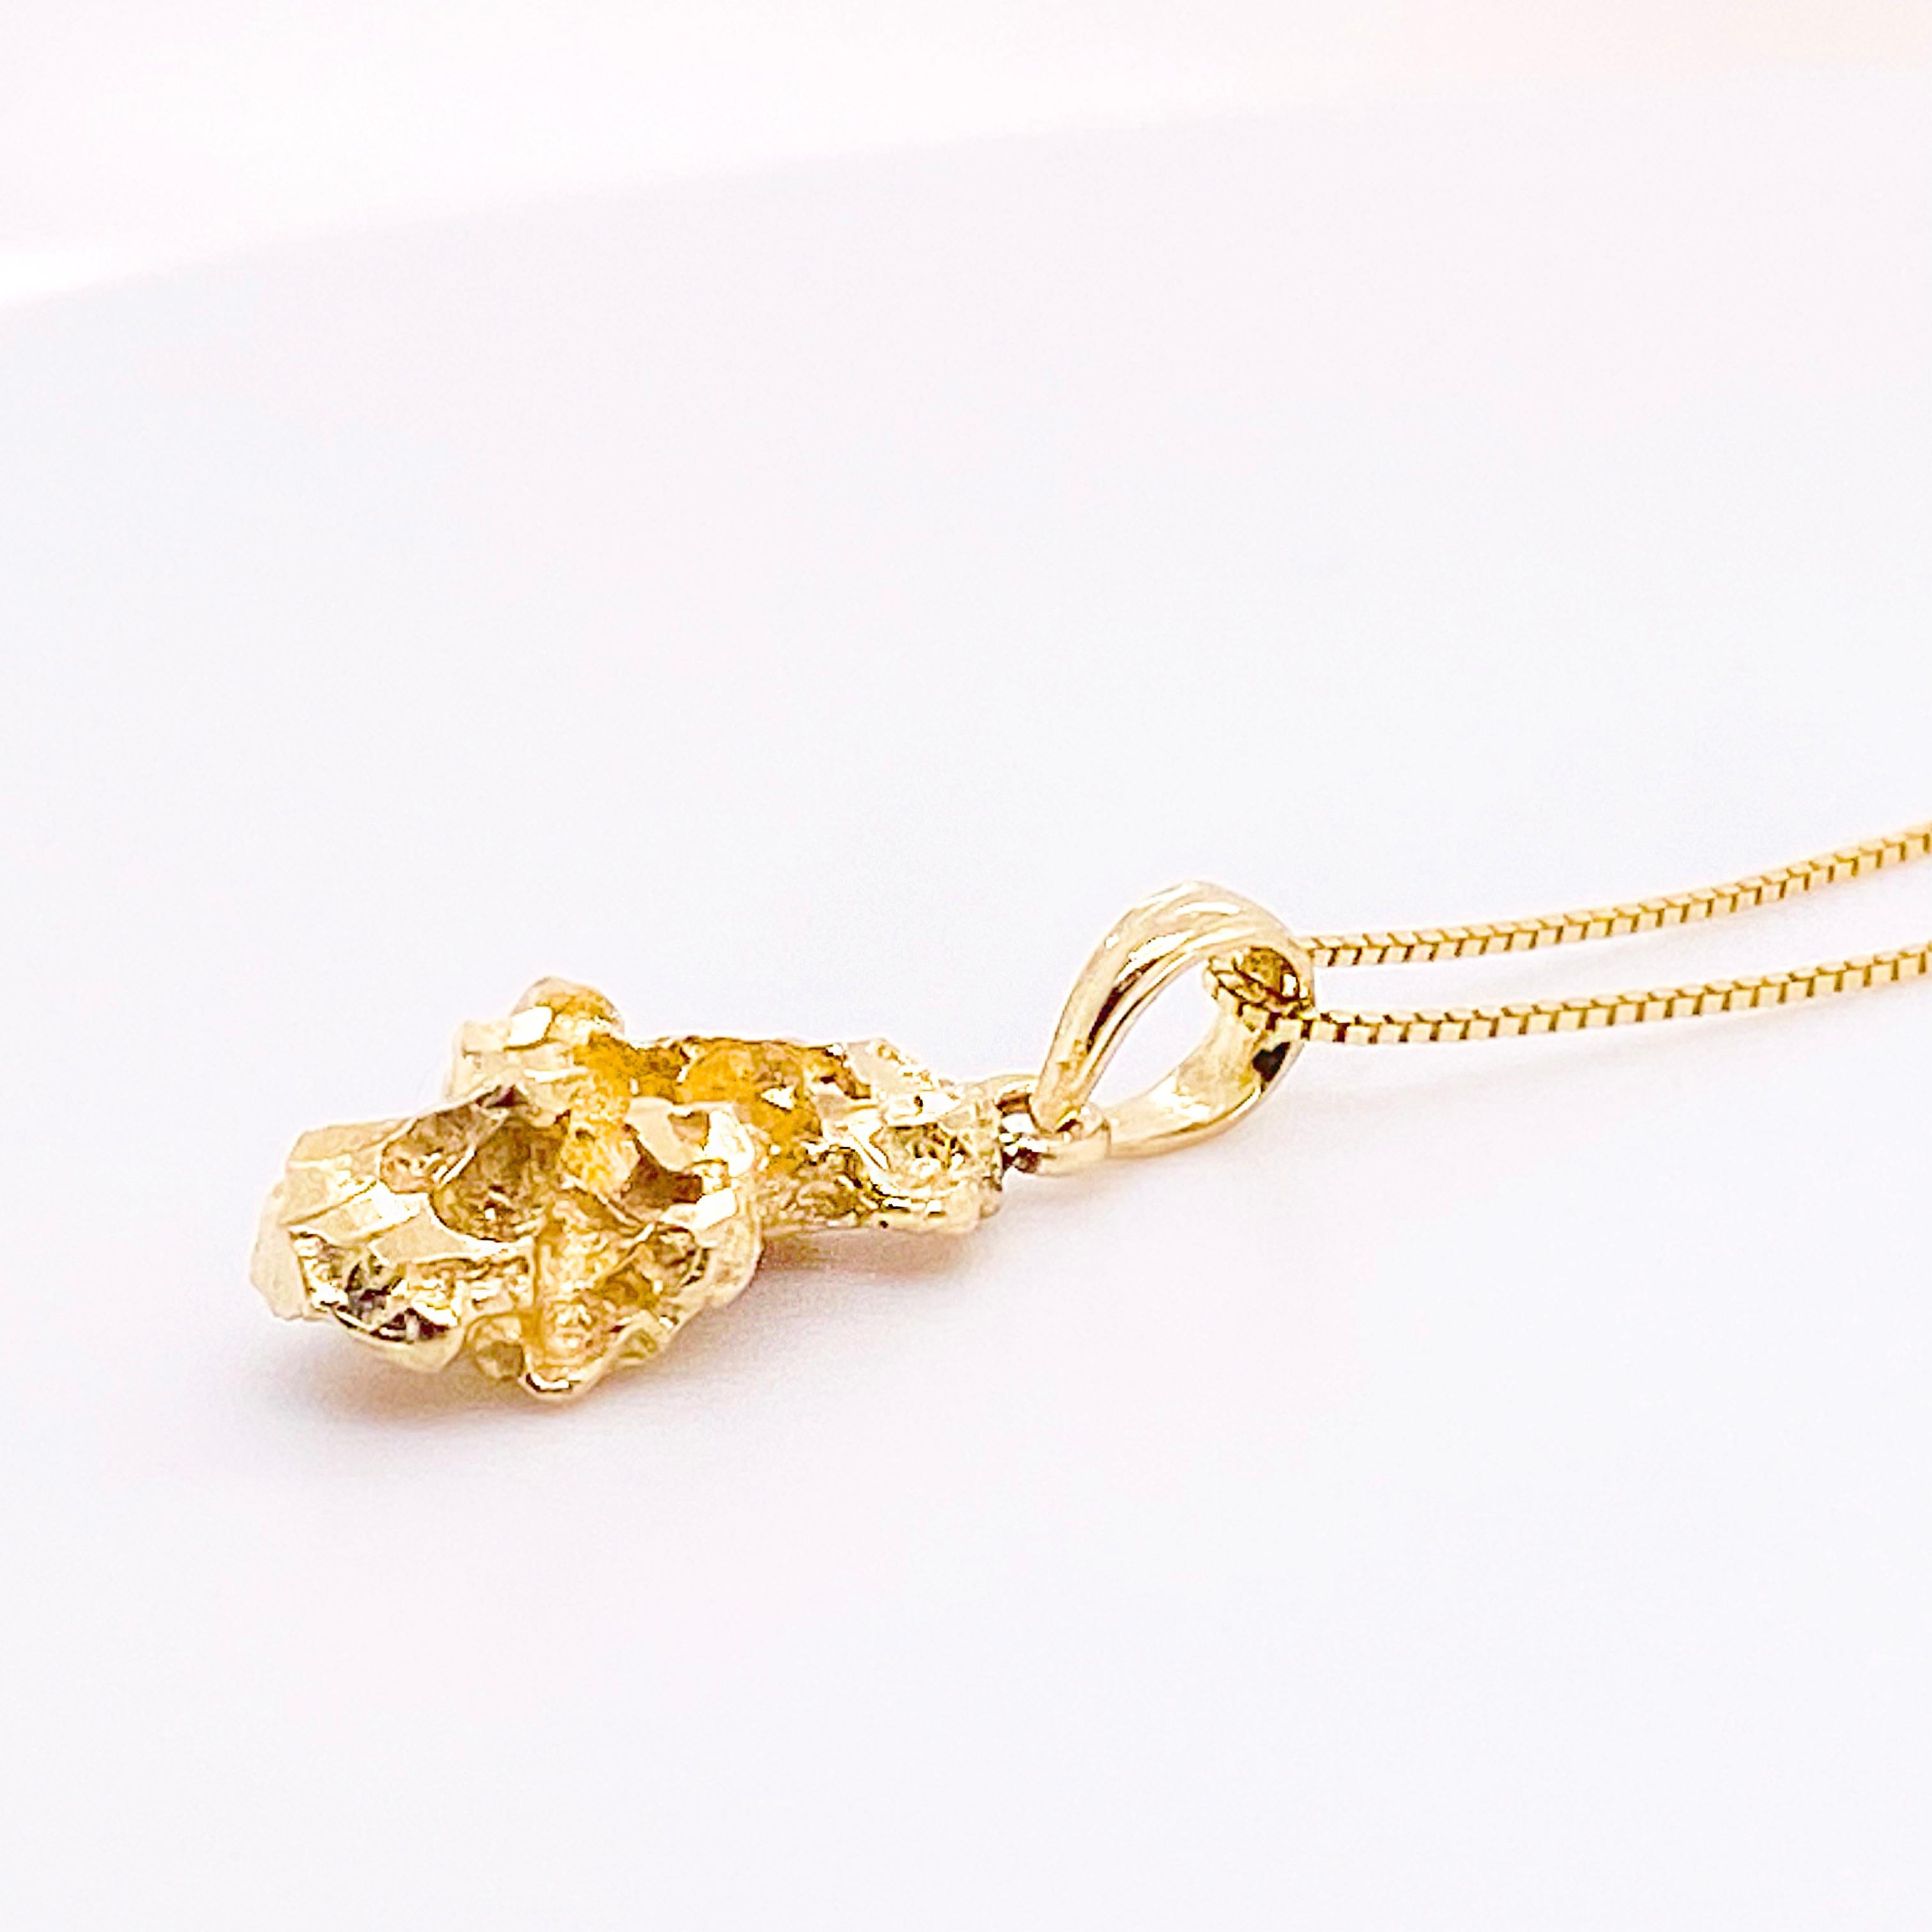 This 14 karat yellow gold diamond-cut nugget pendant is sparkly with mirror finishes in several places. Dainty in size, it will look great for an everyday pendant. The box chain is 14 karat yellow gold and measures 18 inches. The chain and pendant